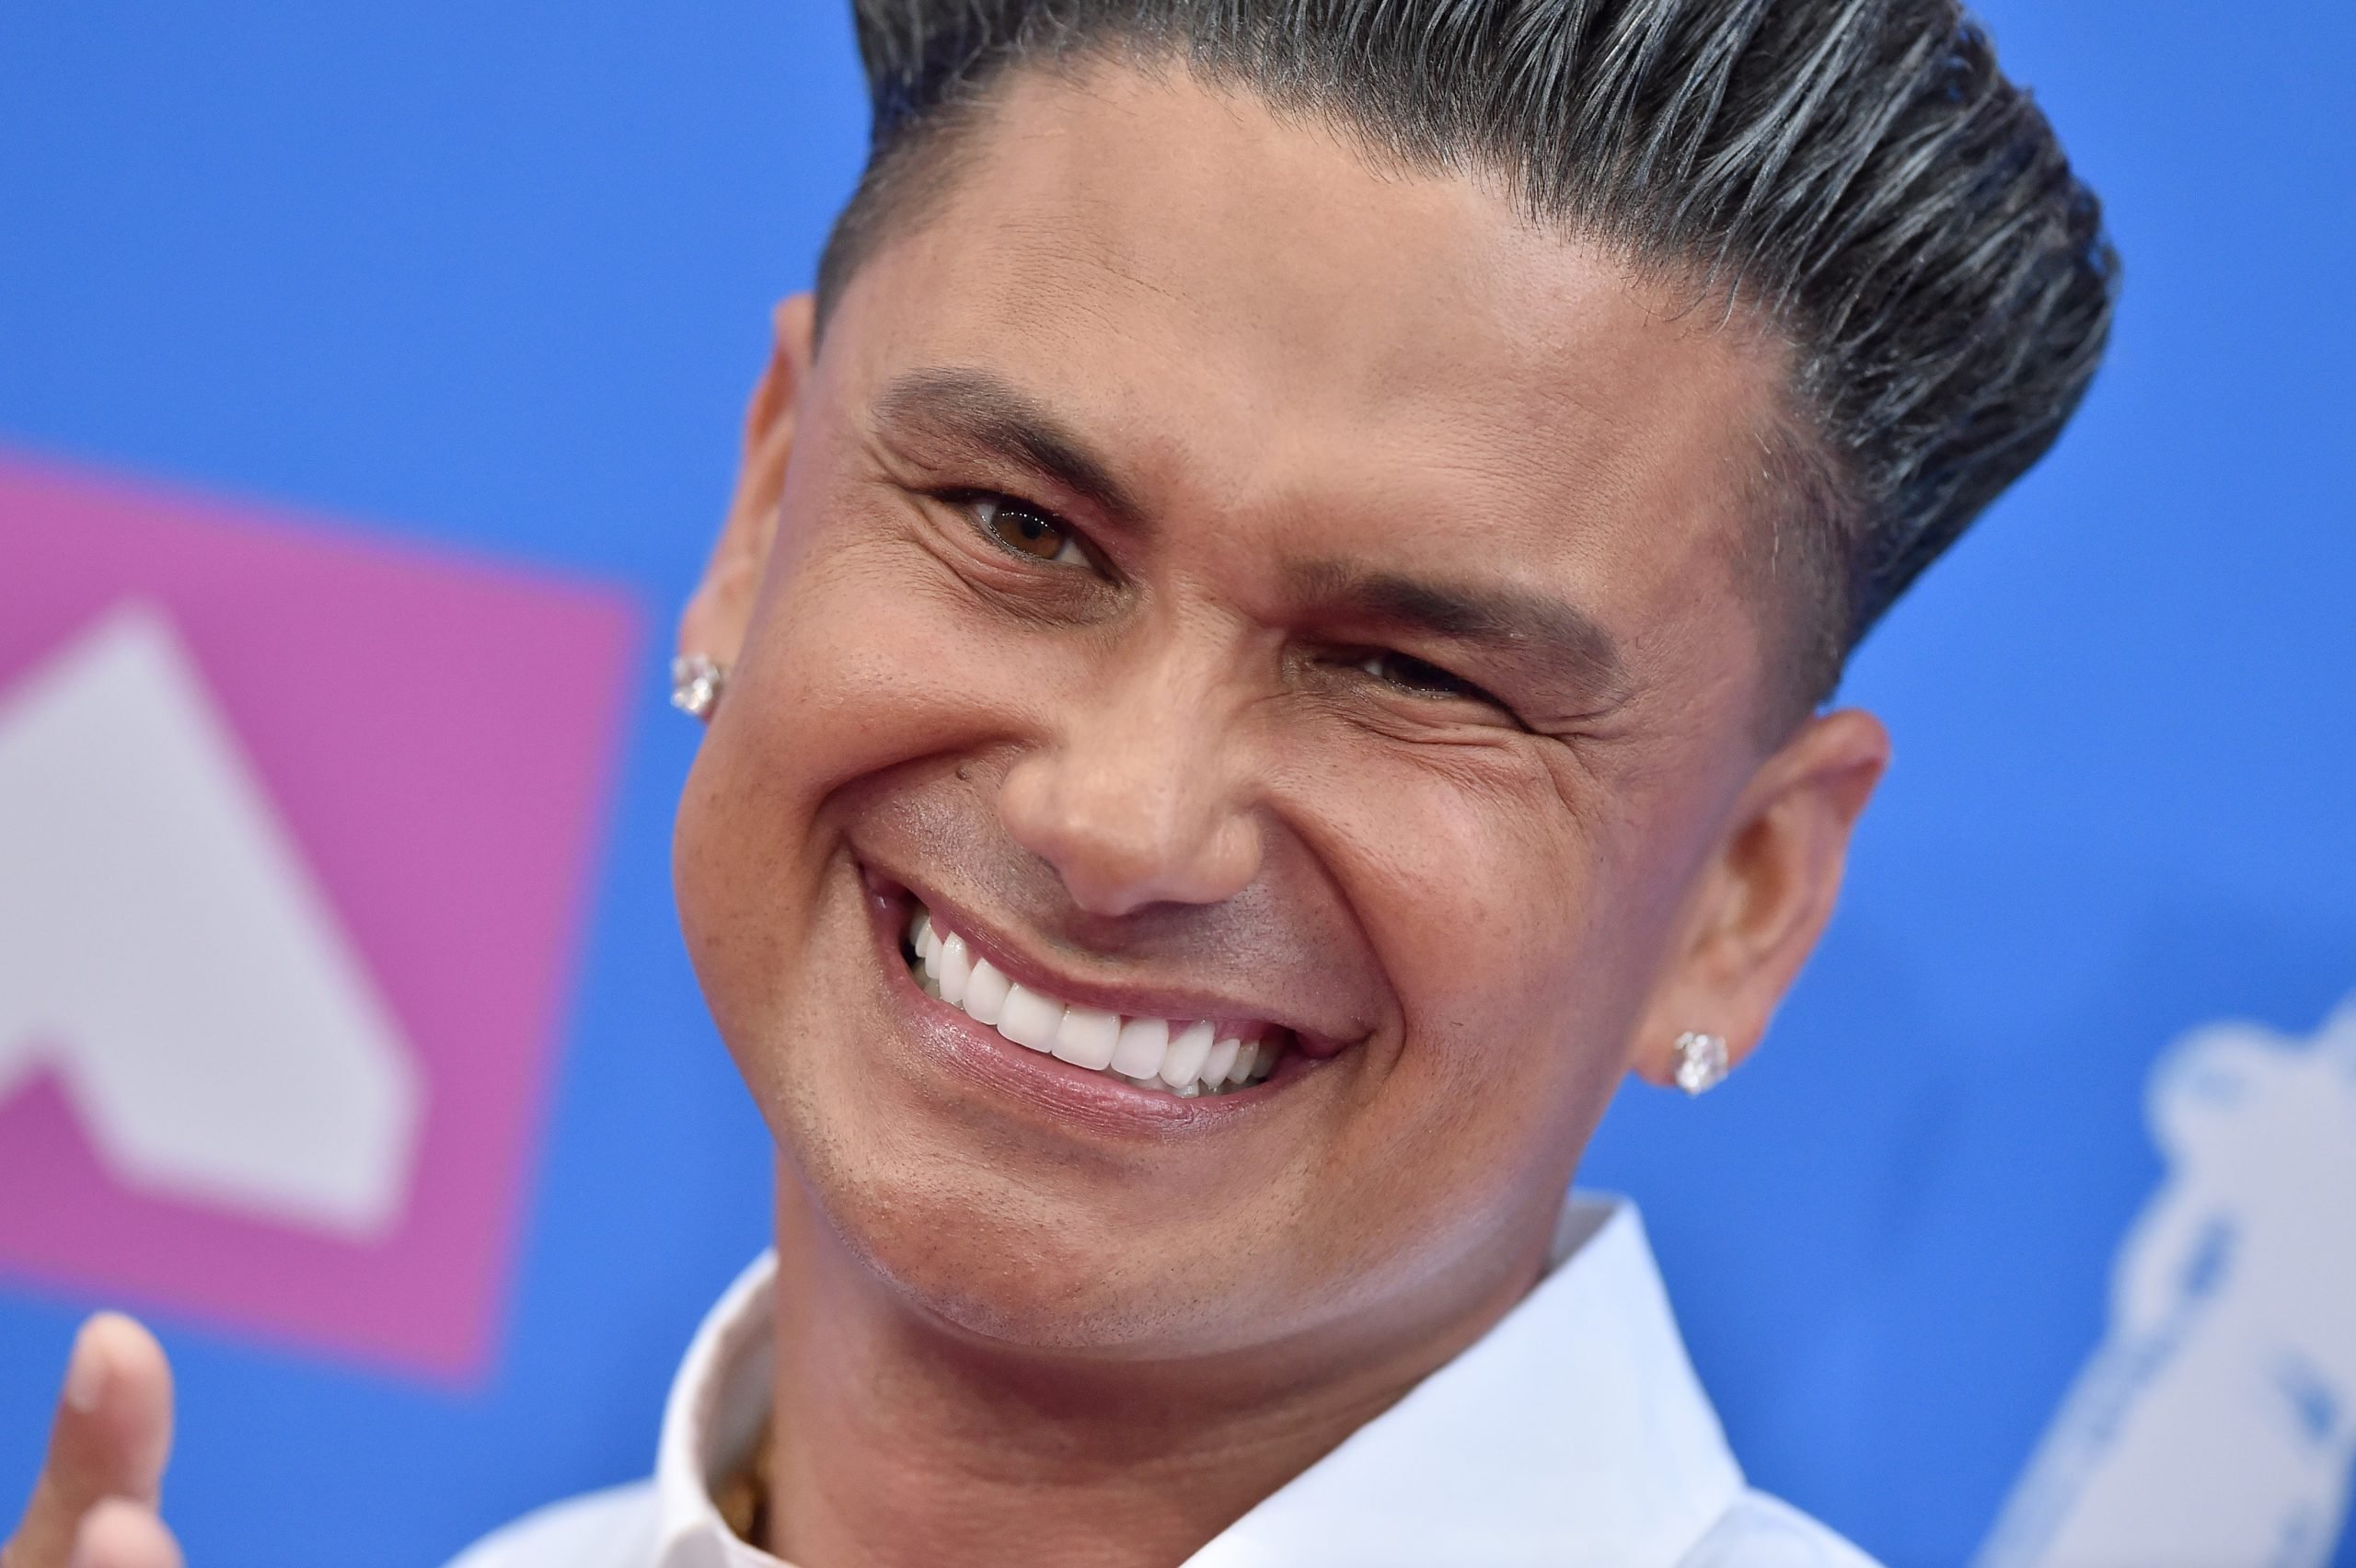 Pauly D's 5 Year Old Daughter Is Just like Him 